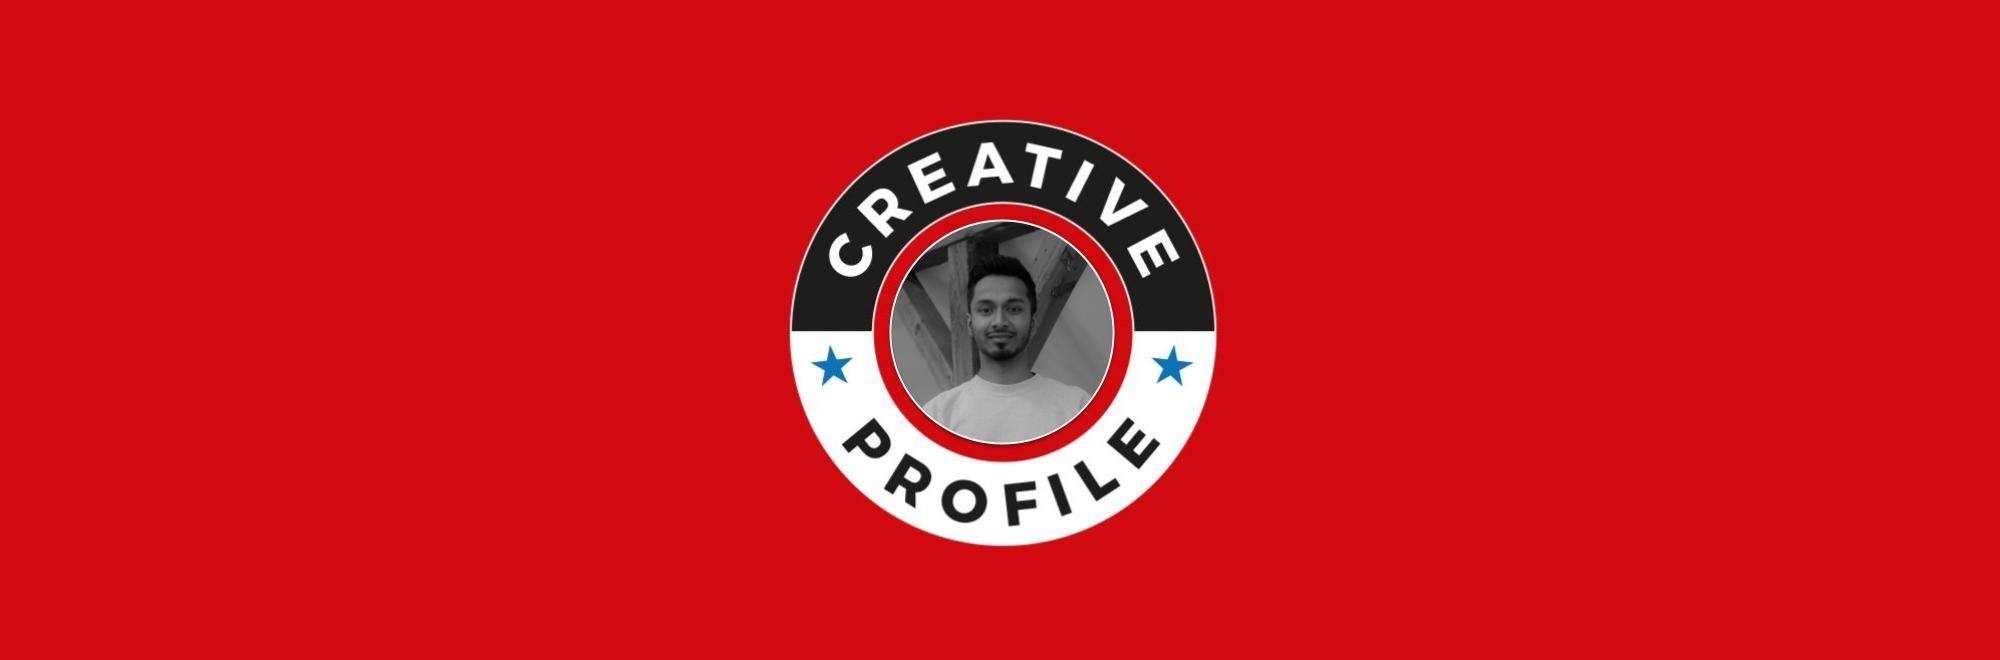 Creative Profile: Ala Uddin, executive creative director at mud orange, talks about design, personal connection to his work and a Yorkshire brew